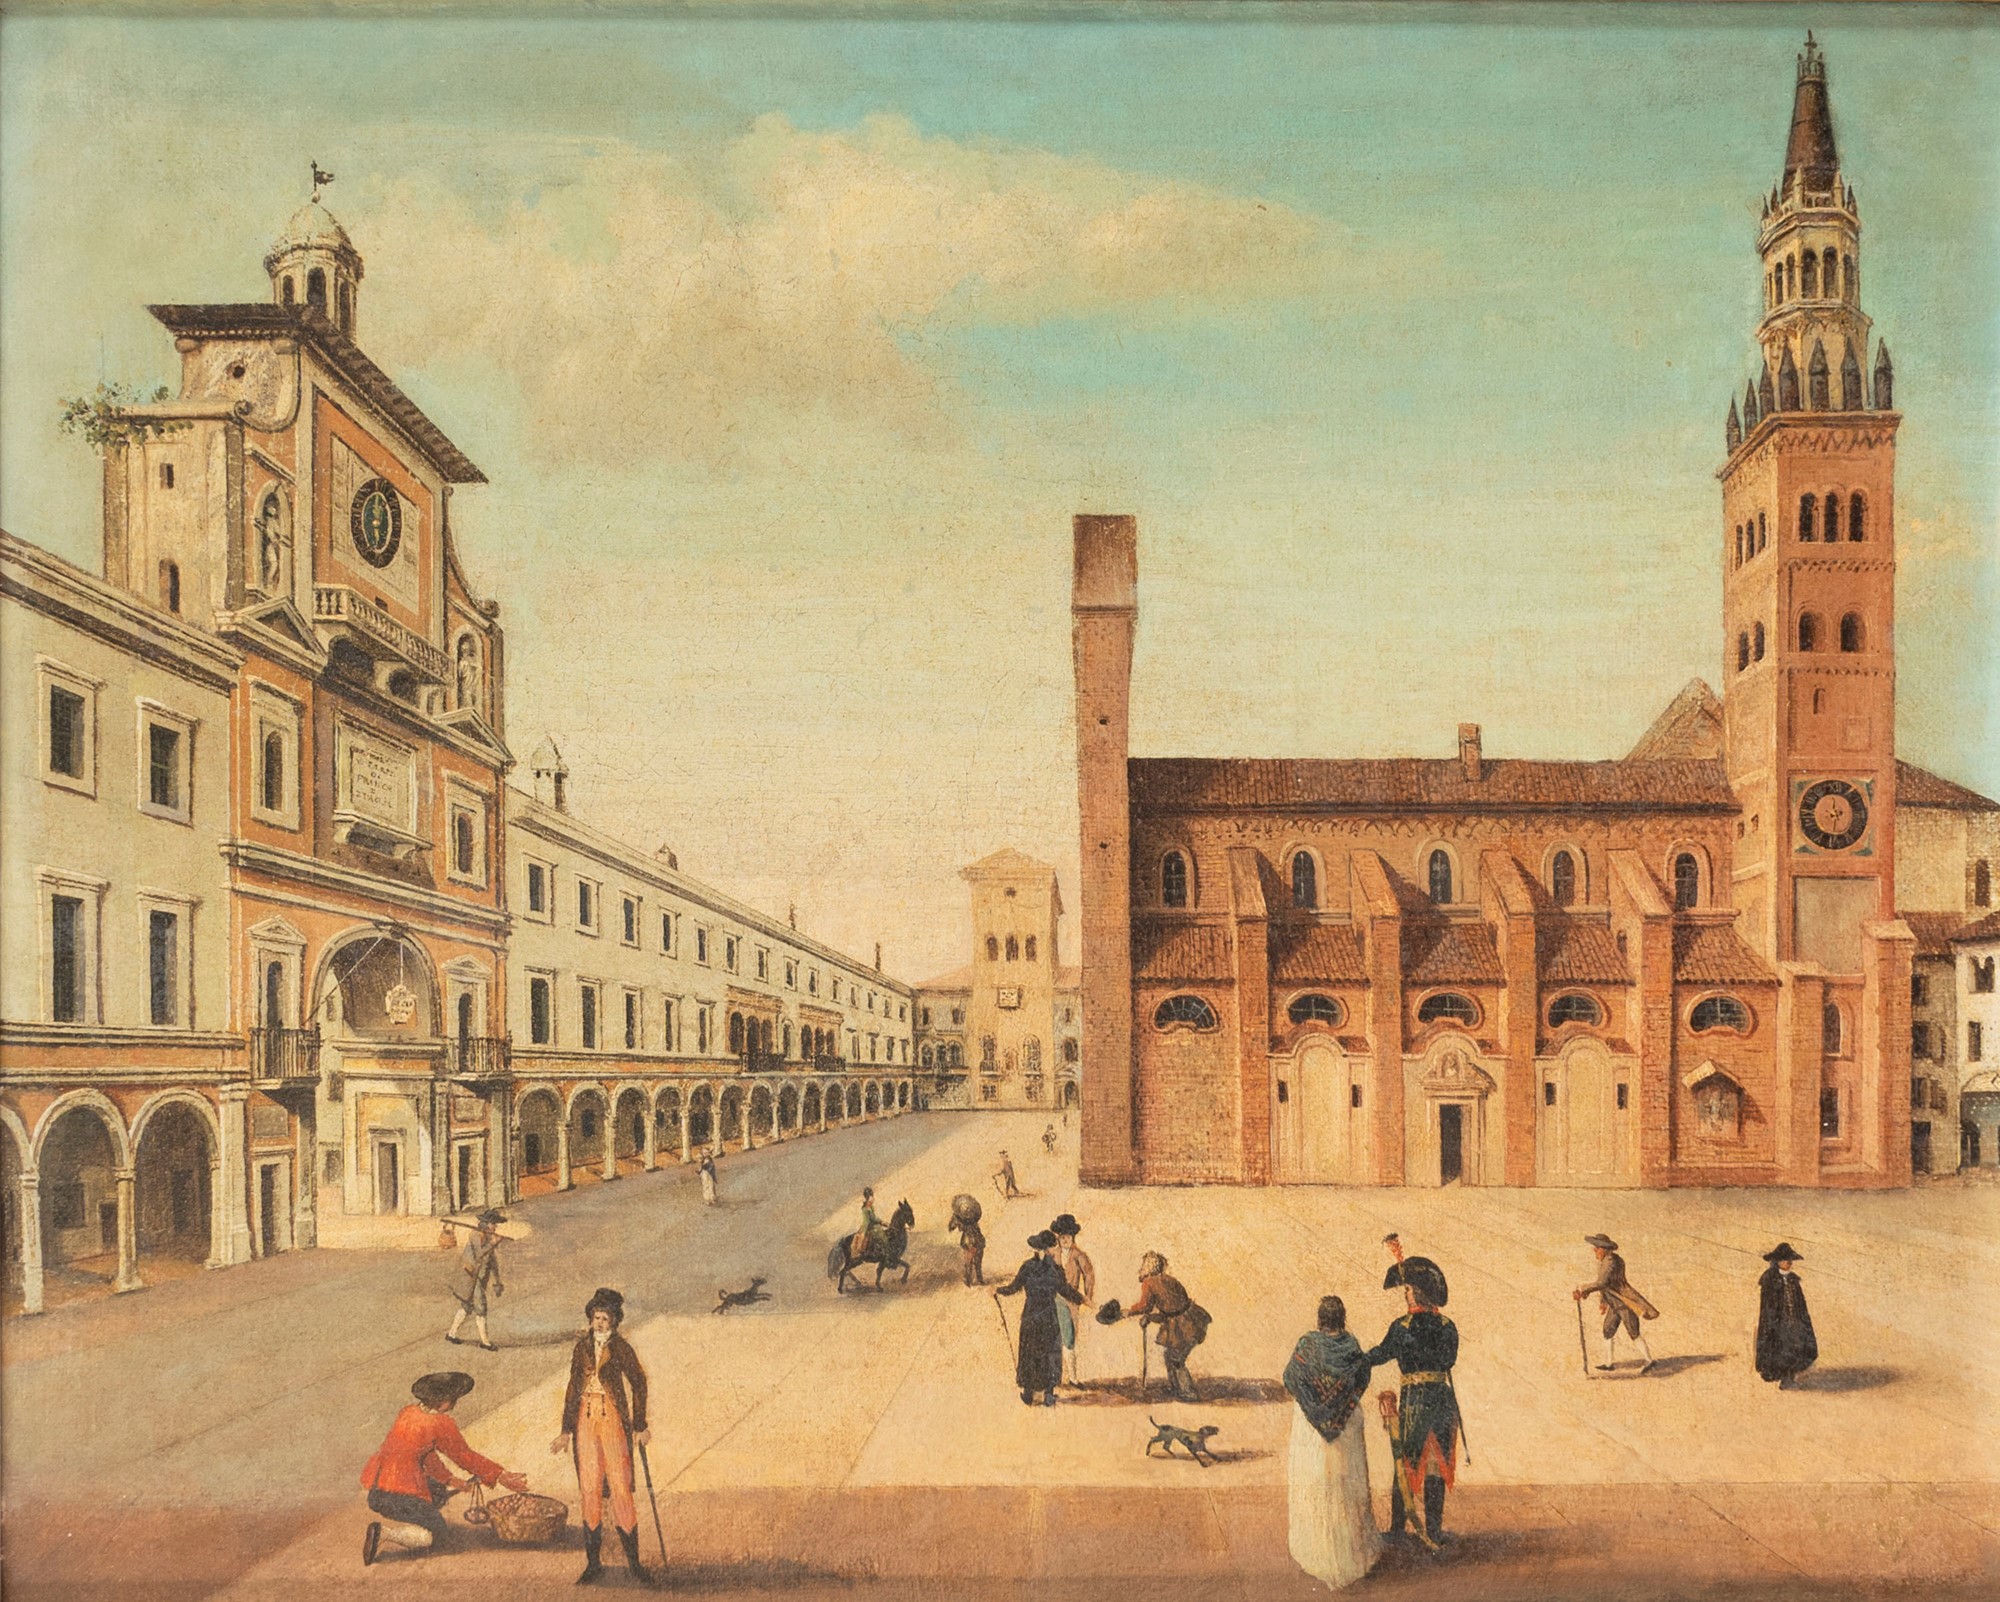 School of Northern Italy, early nineteenth century - View of Crema with the Cathedral of Santa Maria